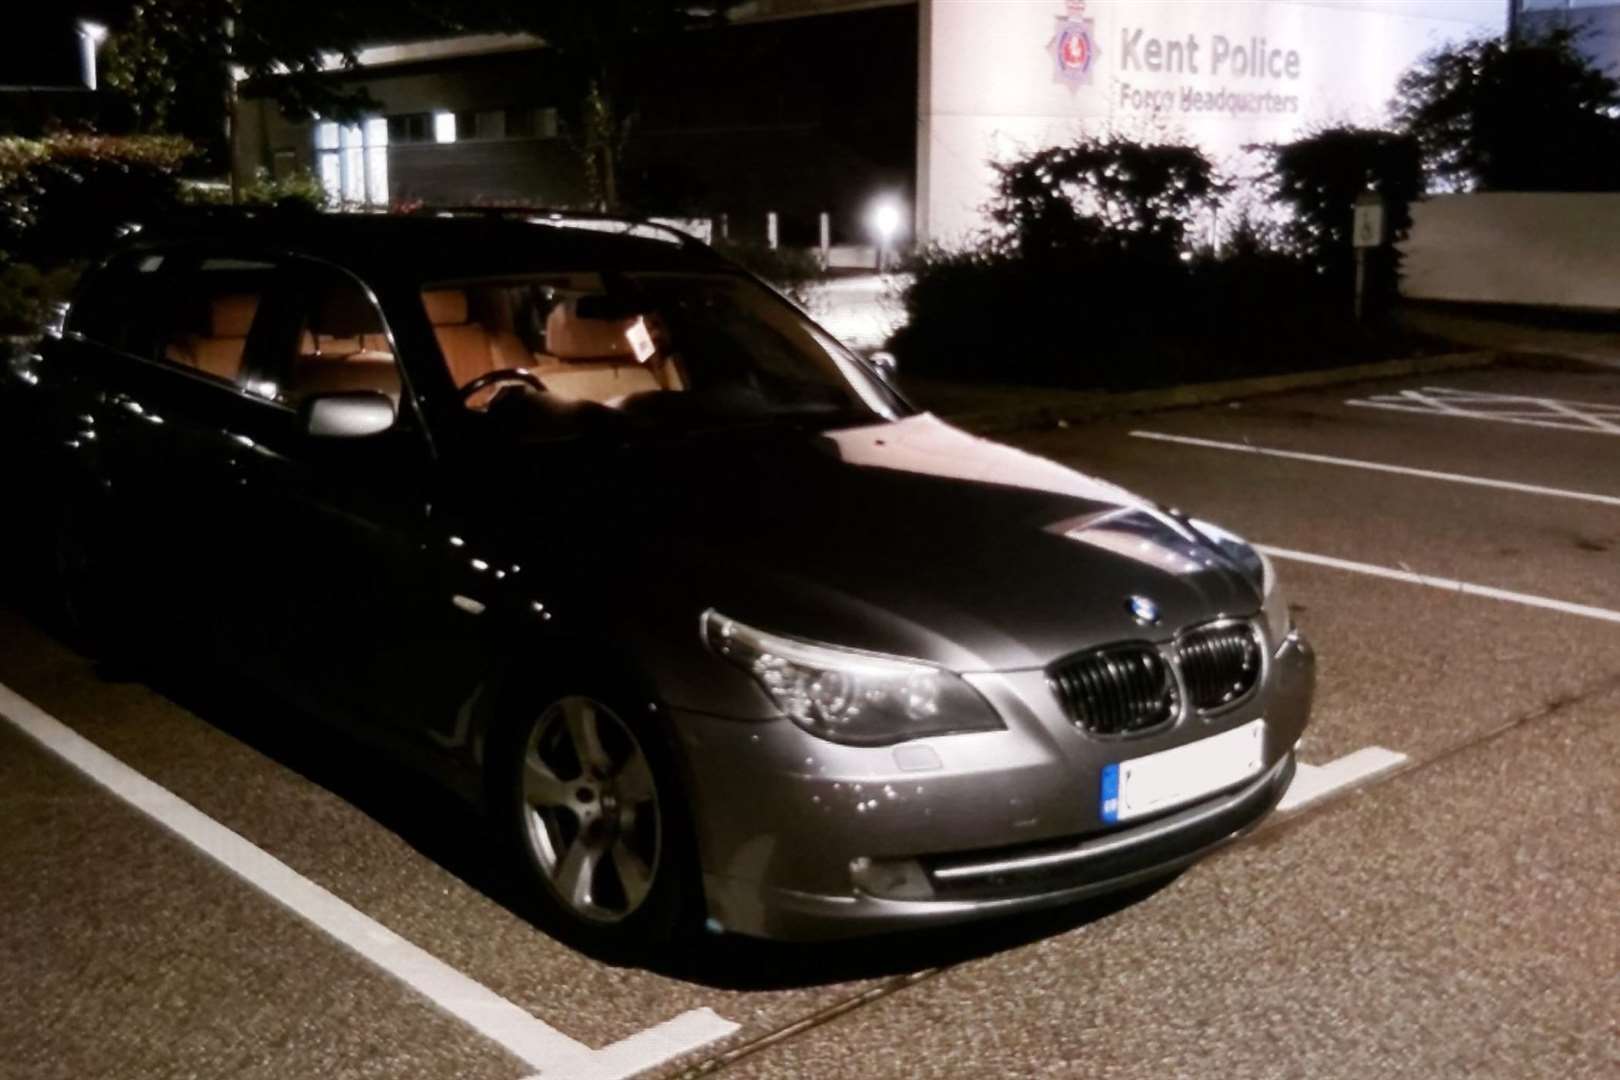 The BMW was clocked at around 100mph on the A2. Photo: @KentPoliceRPU